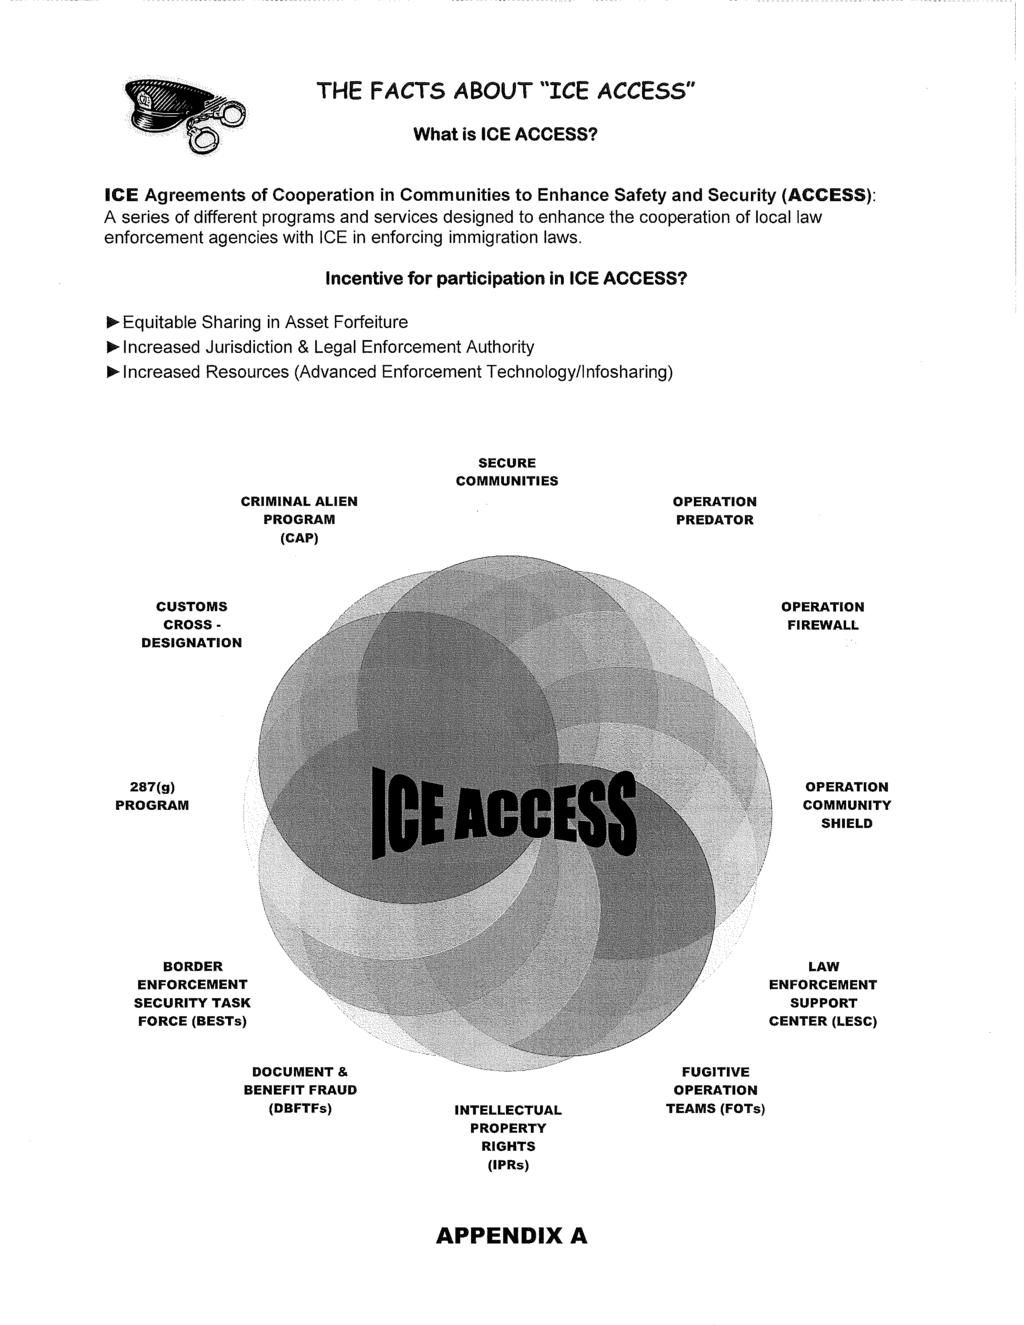 THE FACTS ABOUT "ICE ACCESS" What is ICE ACCESS?